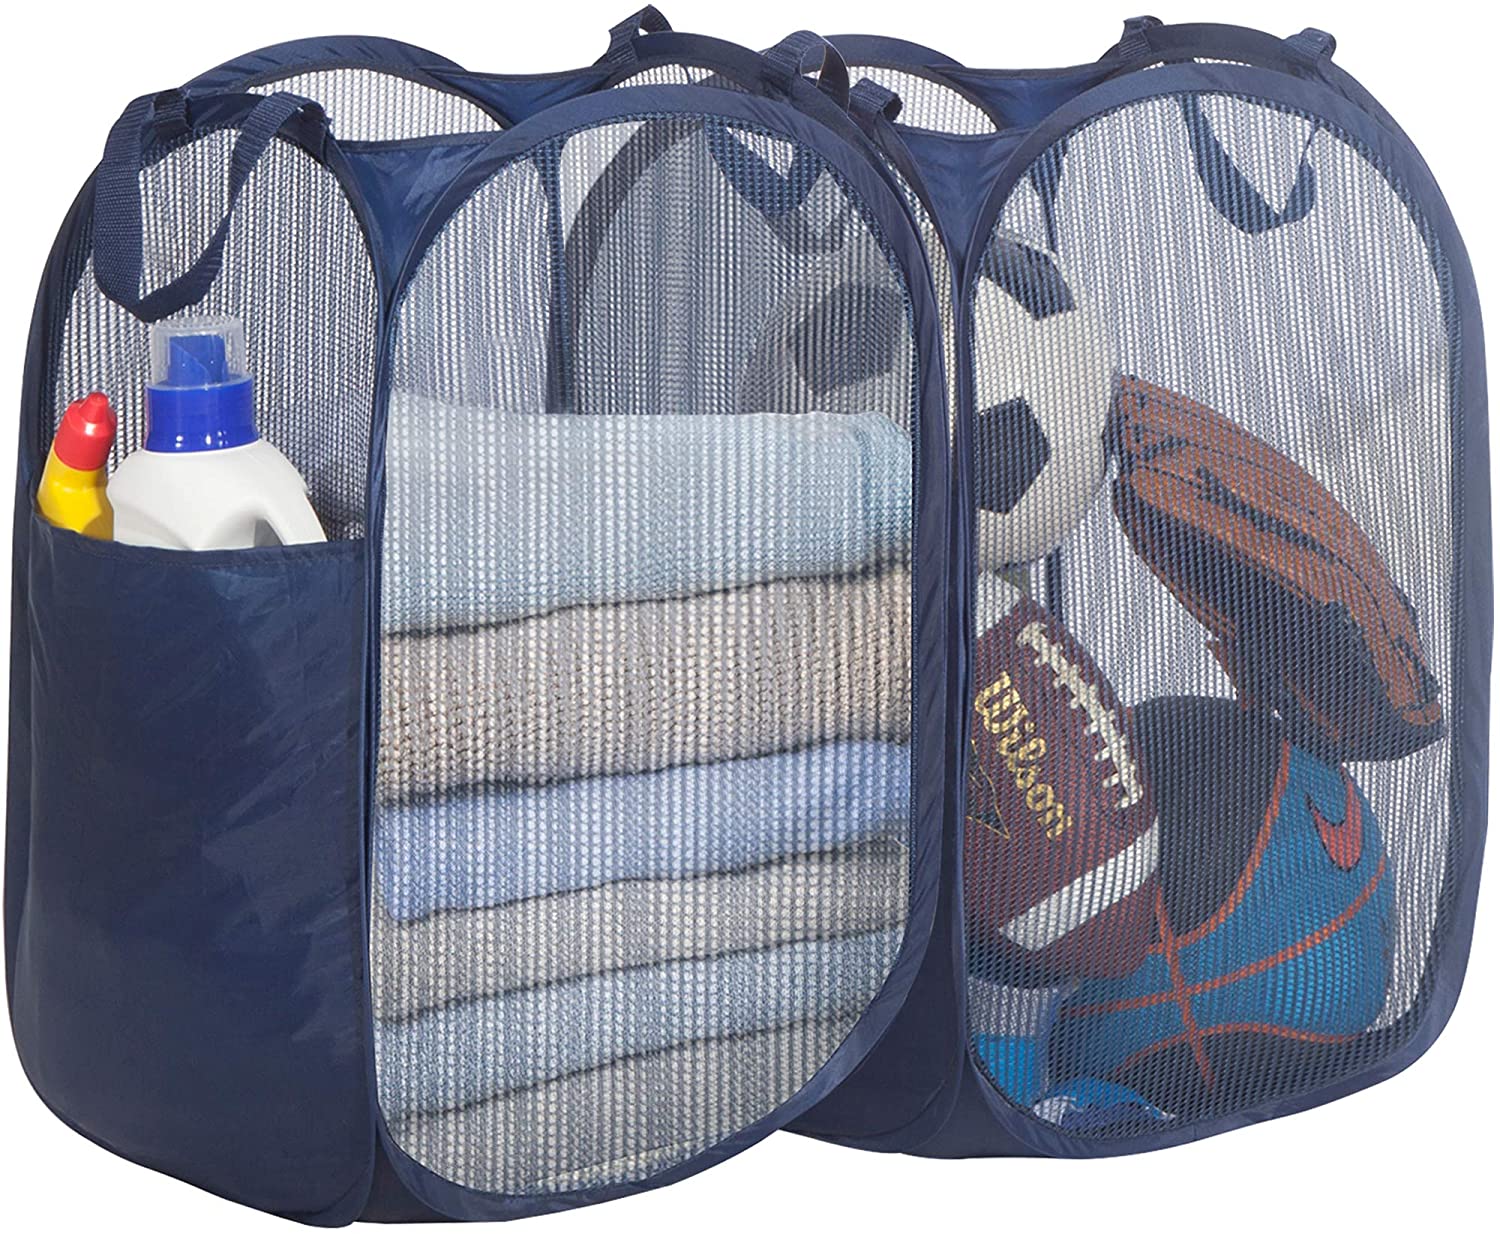 Foldable Pop-Up Mesh Hamper with Reinforced Carry Handles Laundry Basket Blue Magicfly Pop-Up Laundry Hamper Pack of 2 